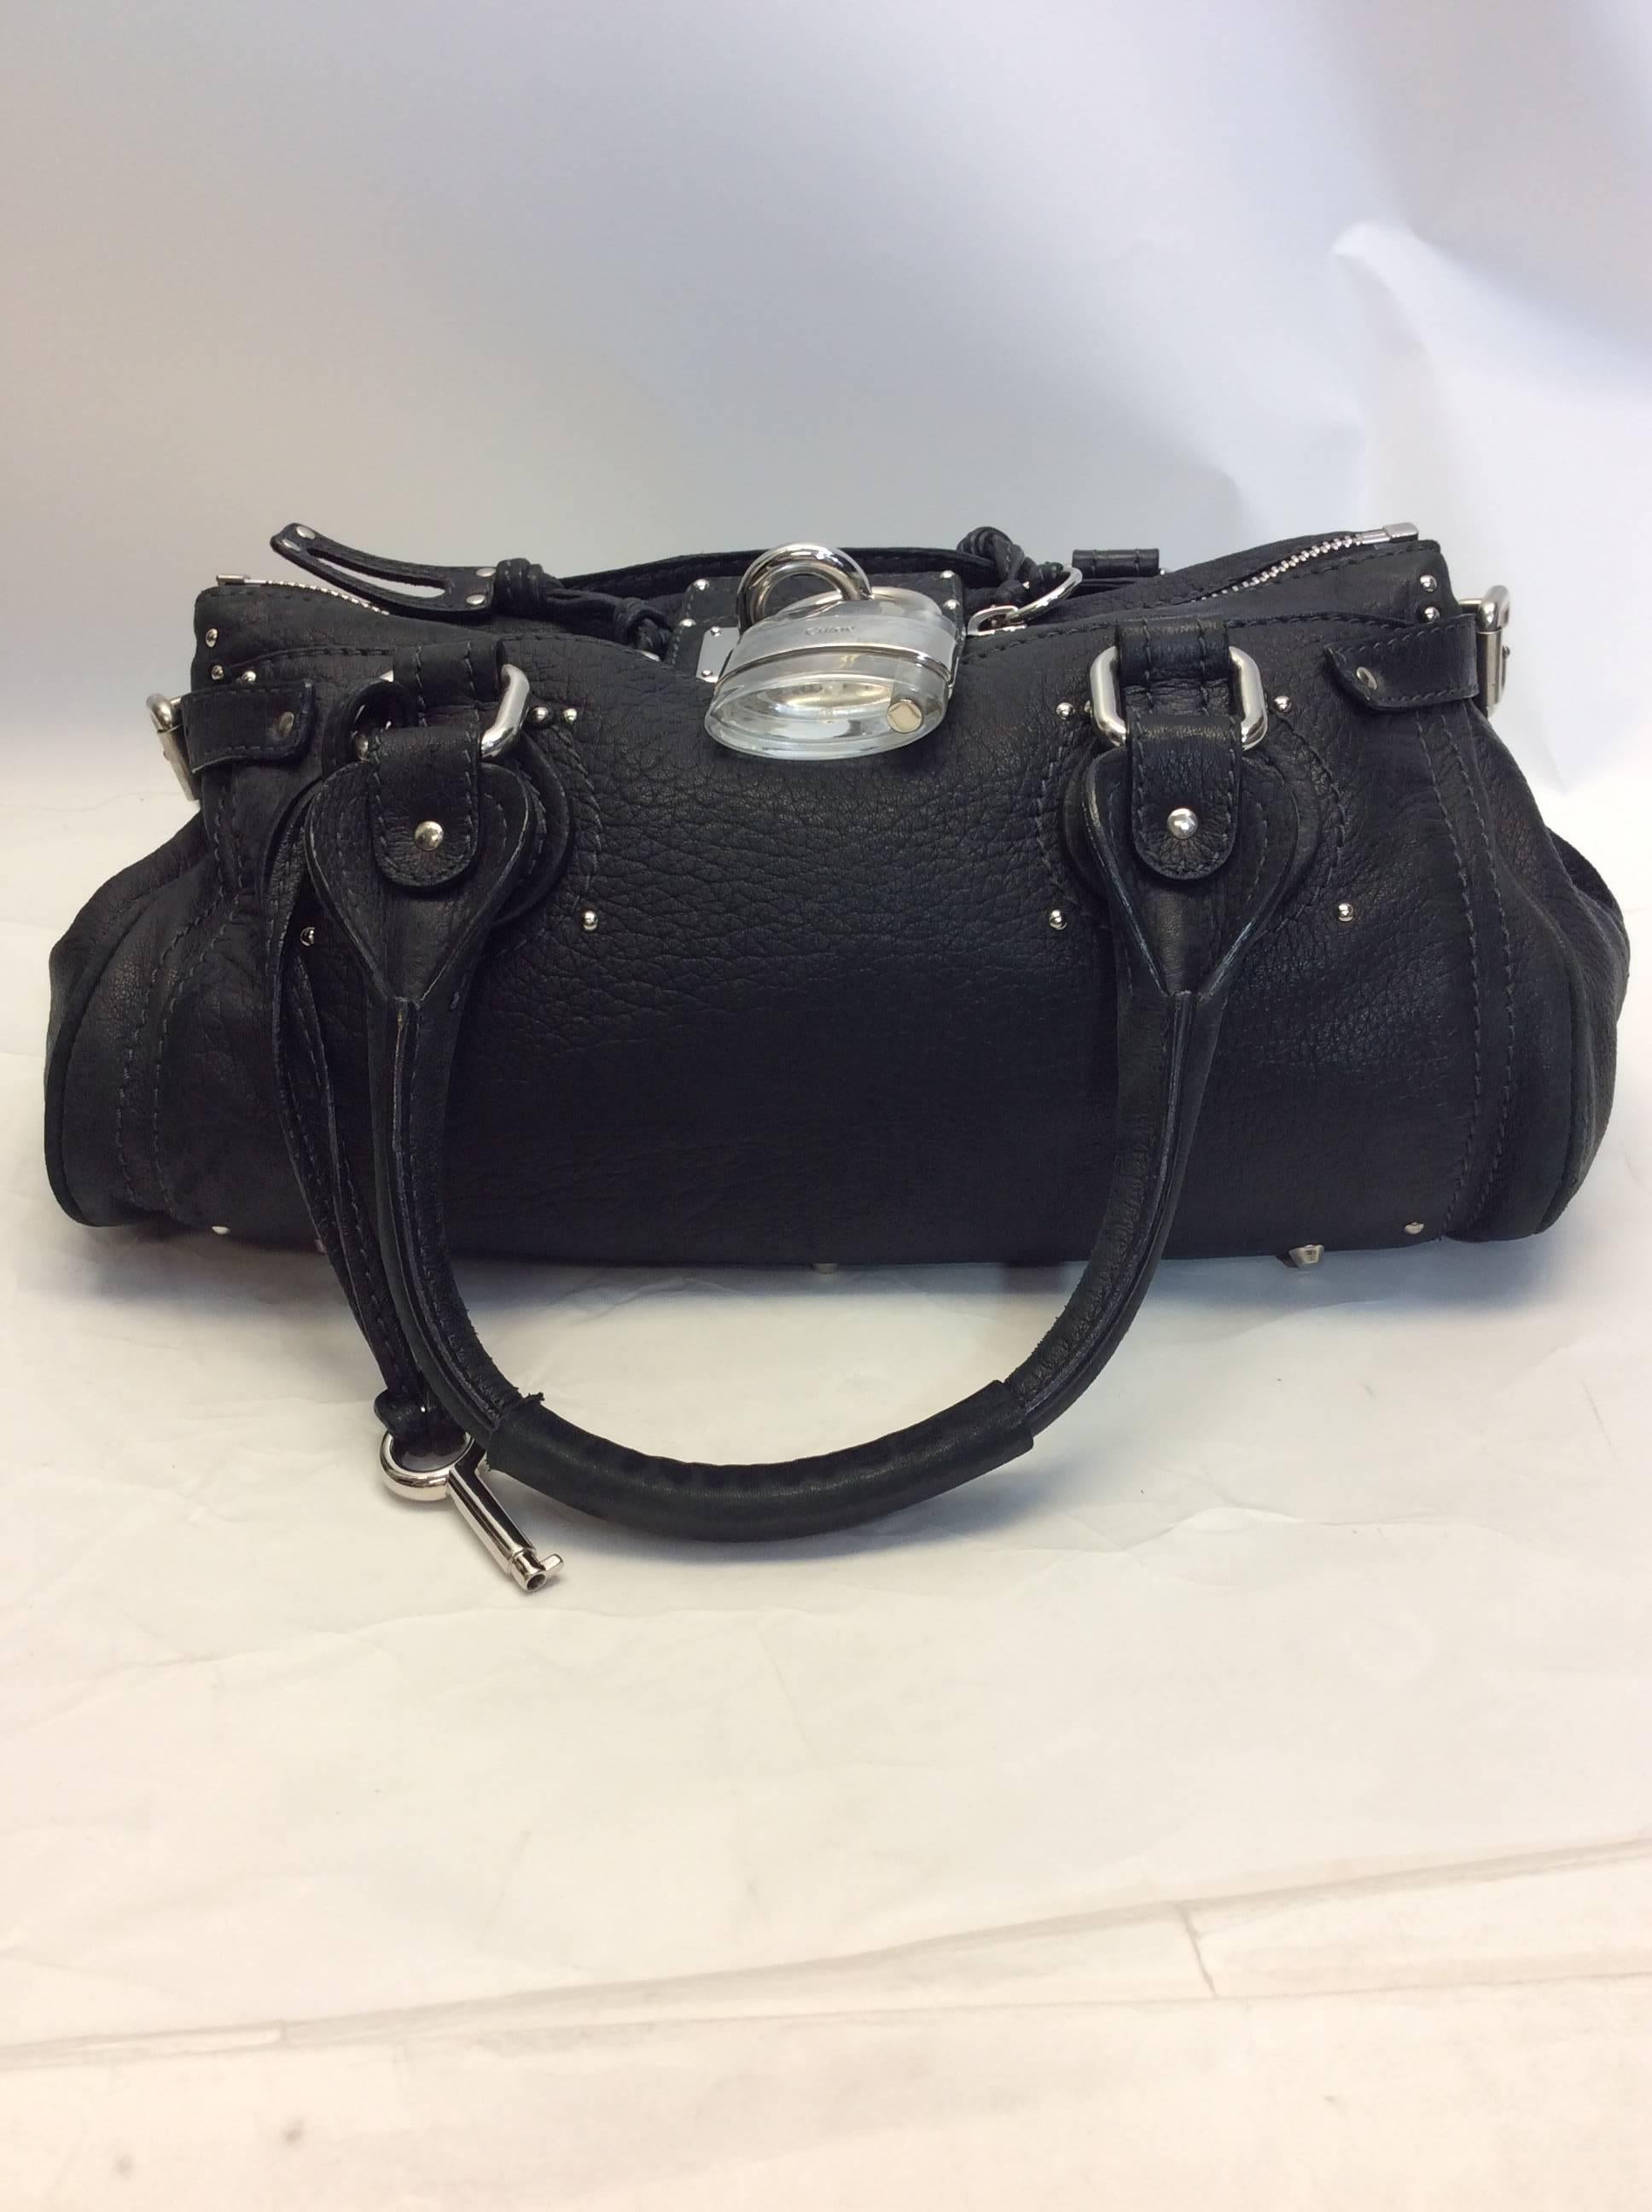 Chloe Black Leather Shoulder Bag In Excellent Condition For Sale In Narberth, PA